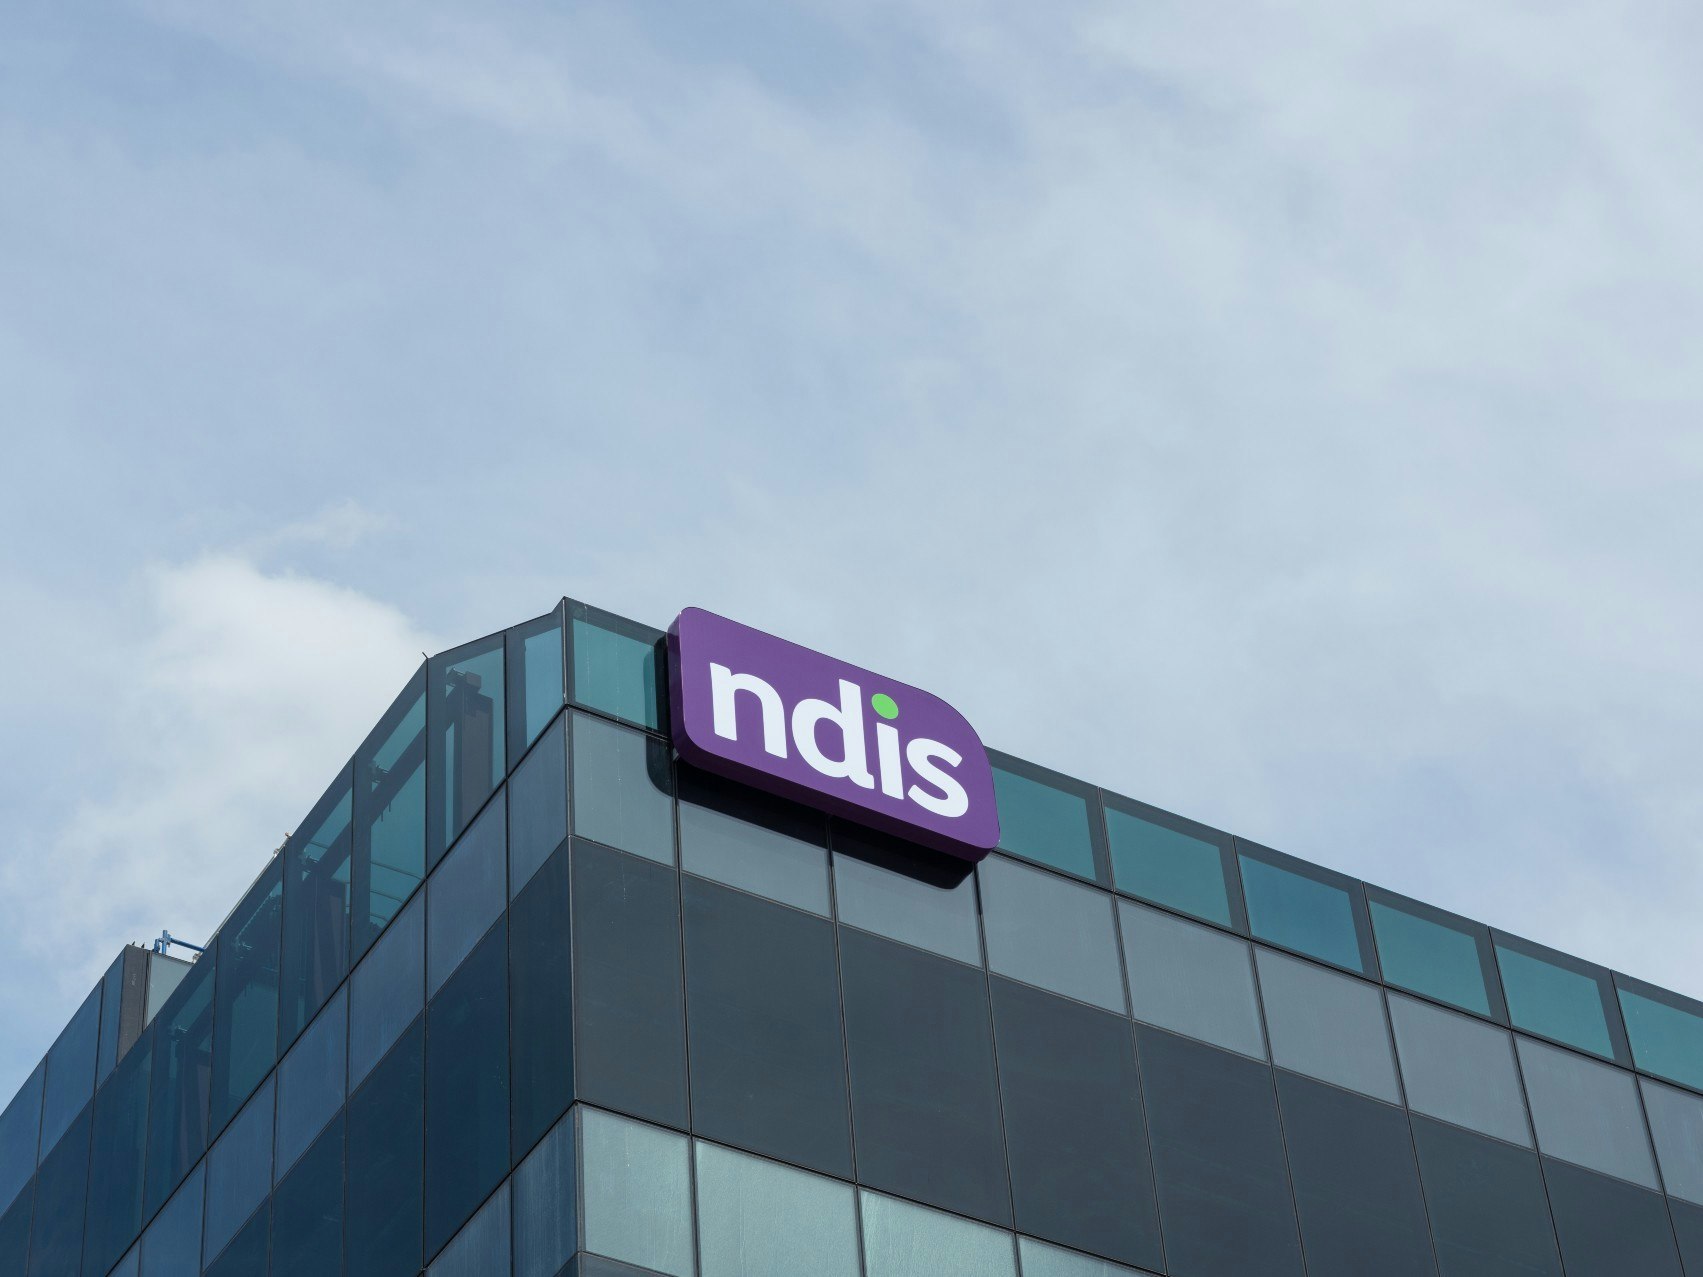 <p>The proposed independent assessments for NDIS participants have been axed in their current form. [Source: Shutterstock]</p>
